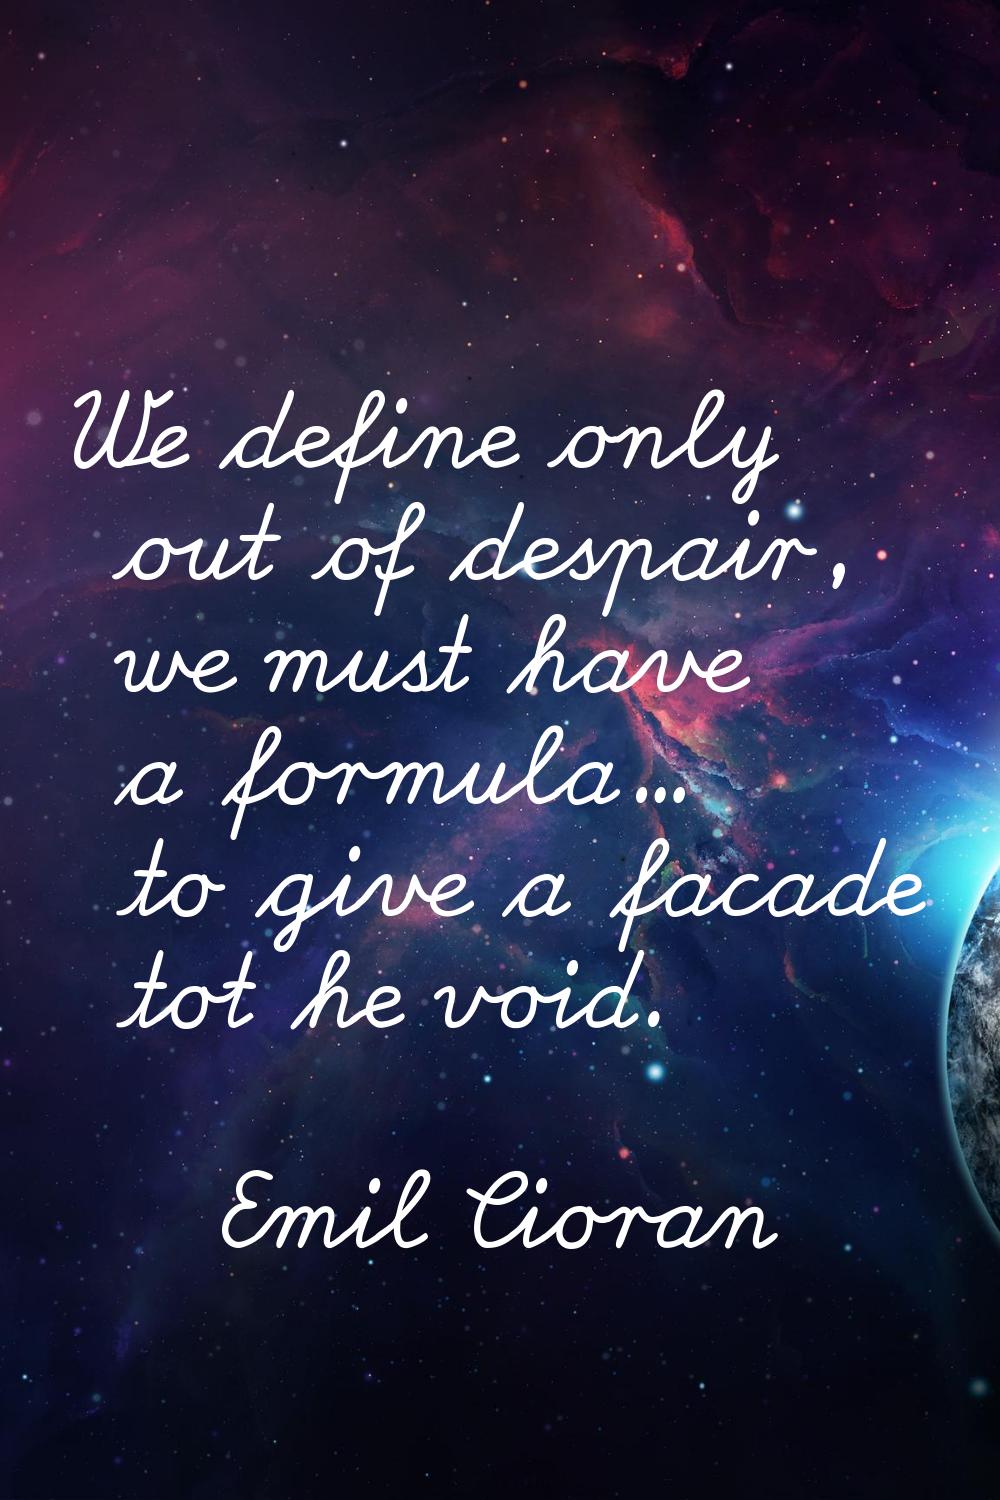 We define only out of despair, we must have a formula... to give a facade tot he void.